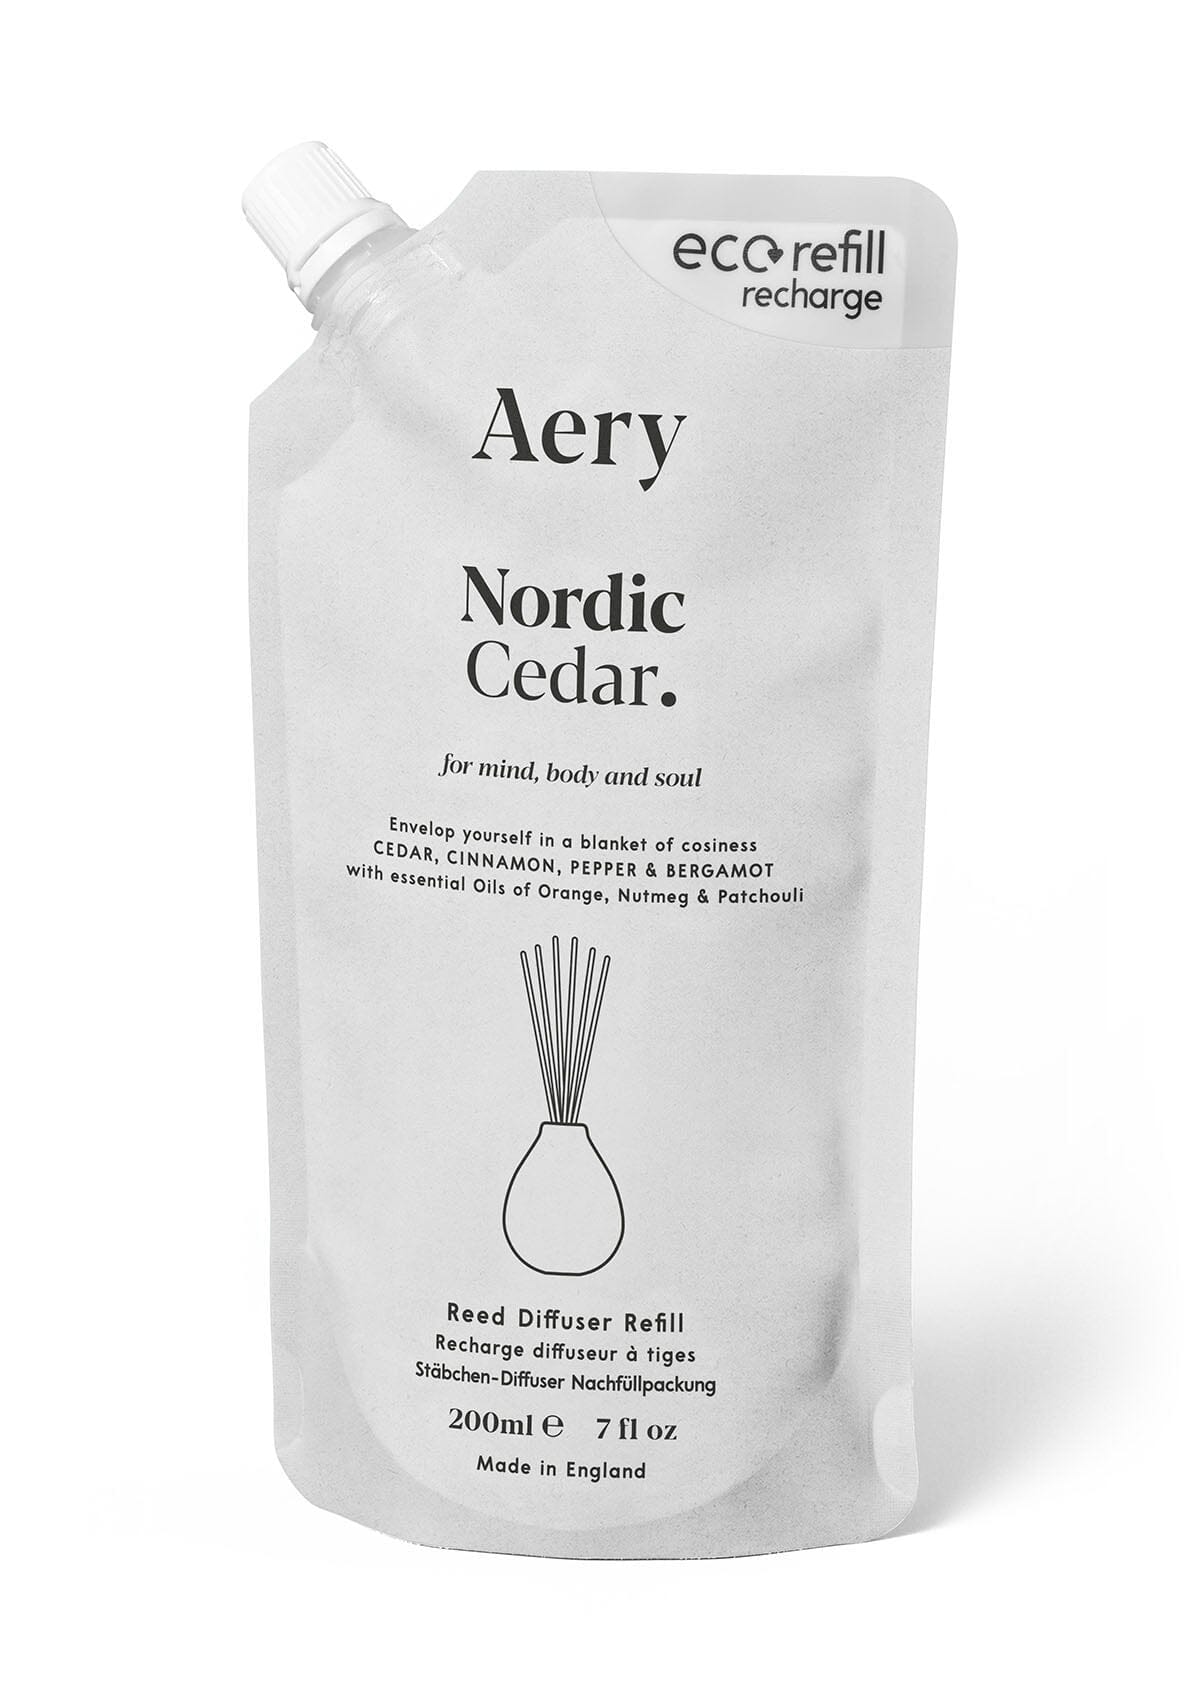 Nordic Cedar reed diffuser refill pouch by aery displayed on white background 